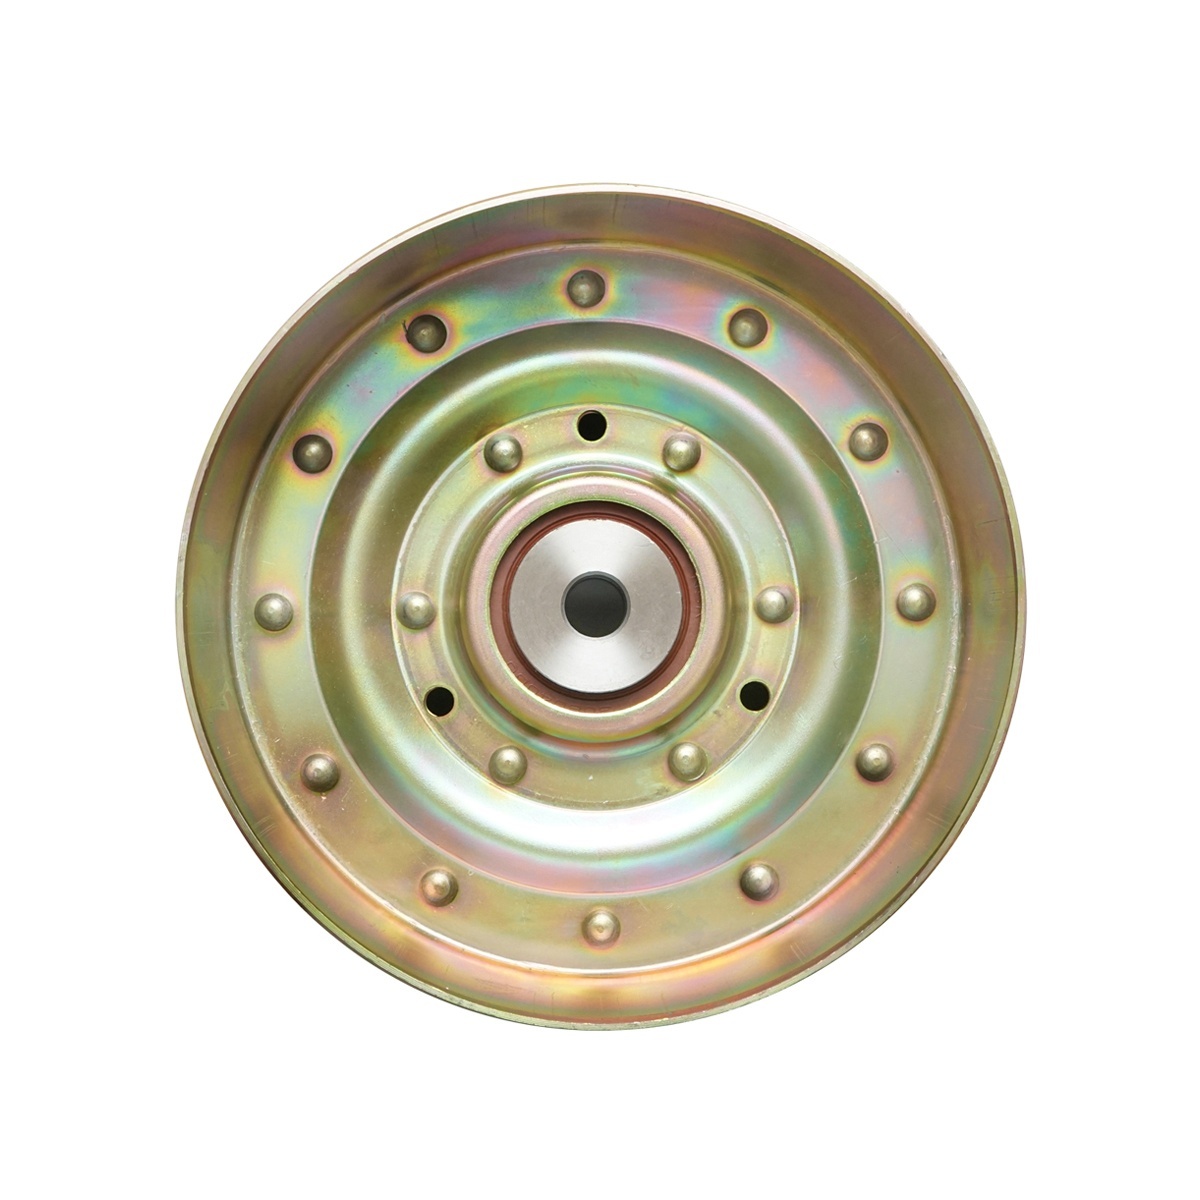 AH141762 Drive Pulley Fits For John Deere